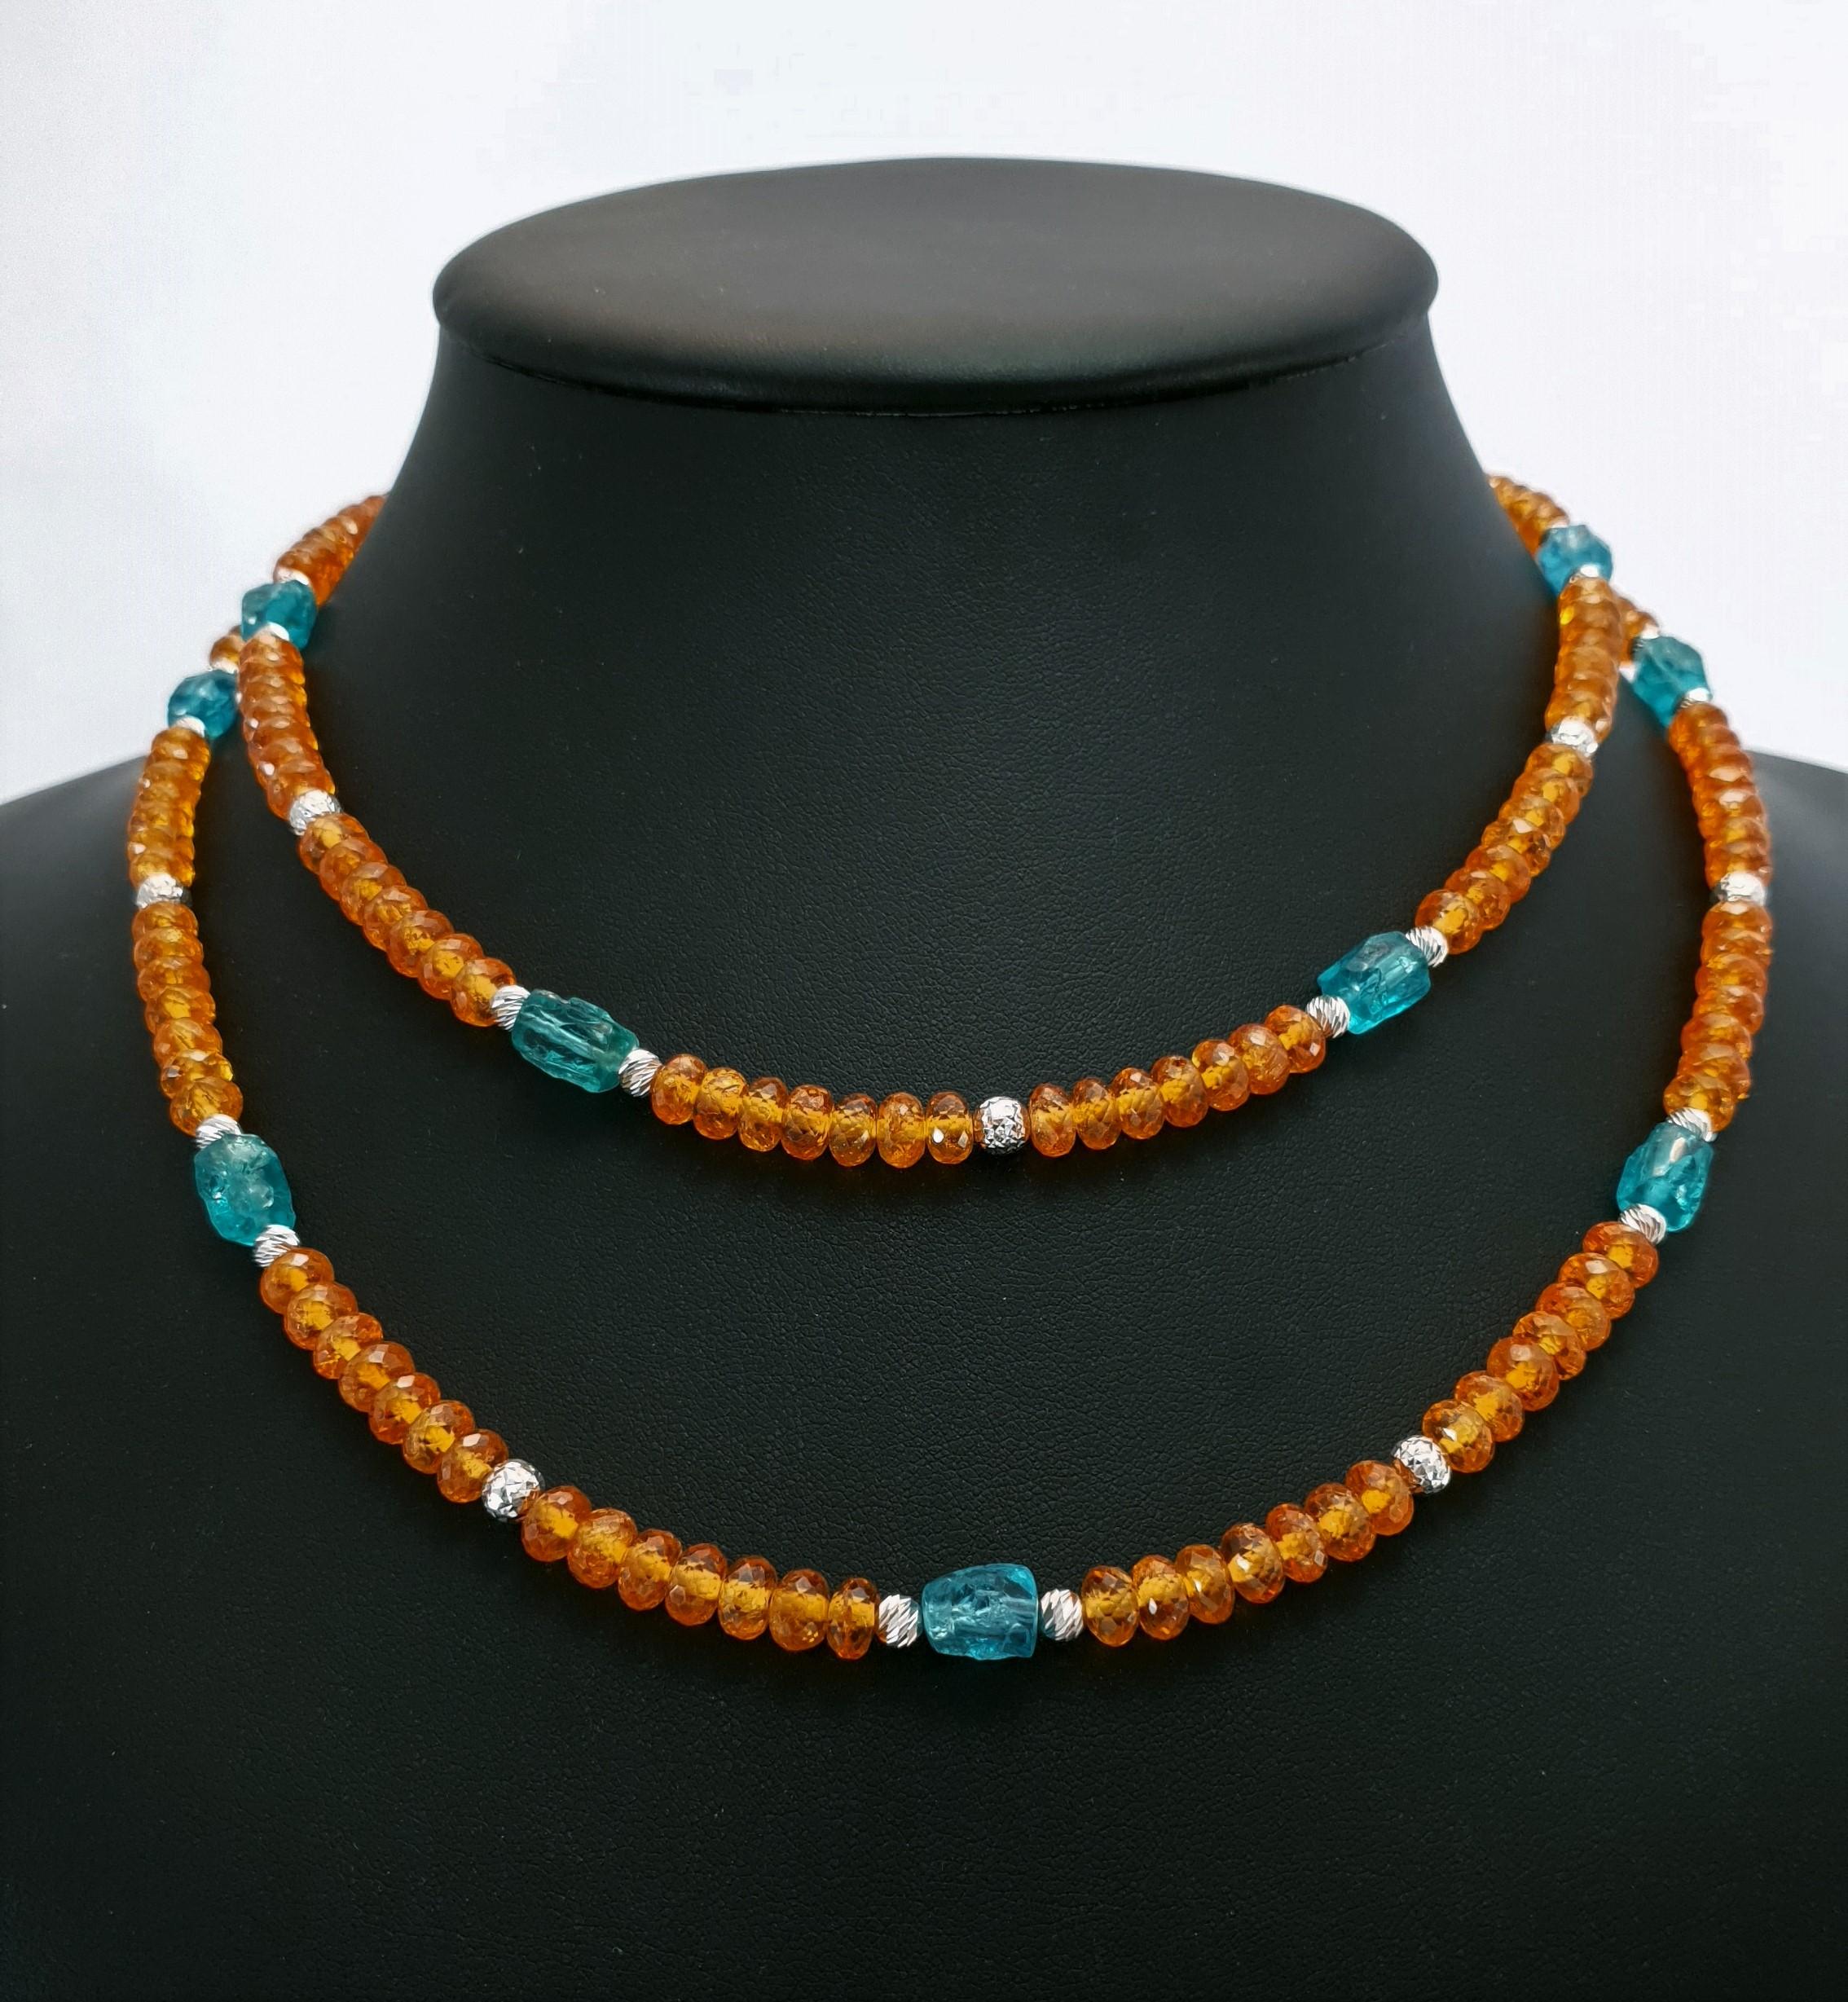 Orange Garnets and Paraiba Color Apatite Beads Necklace with 18 Carat White Gold 9